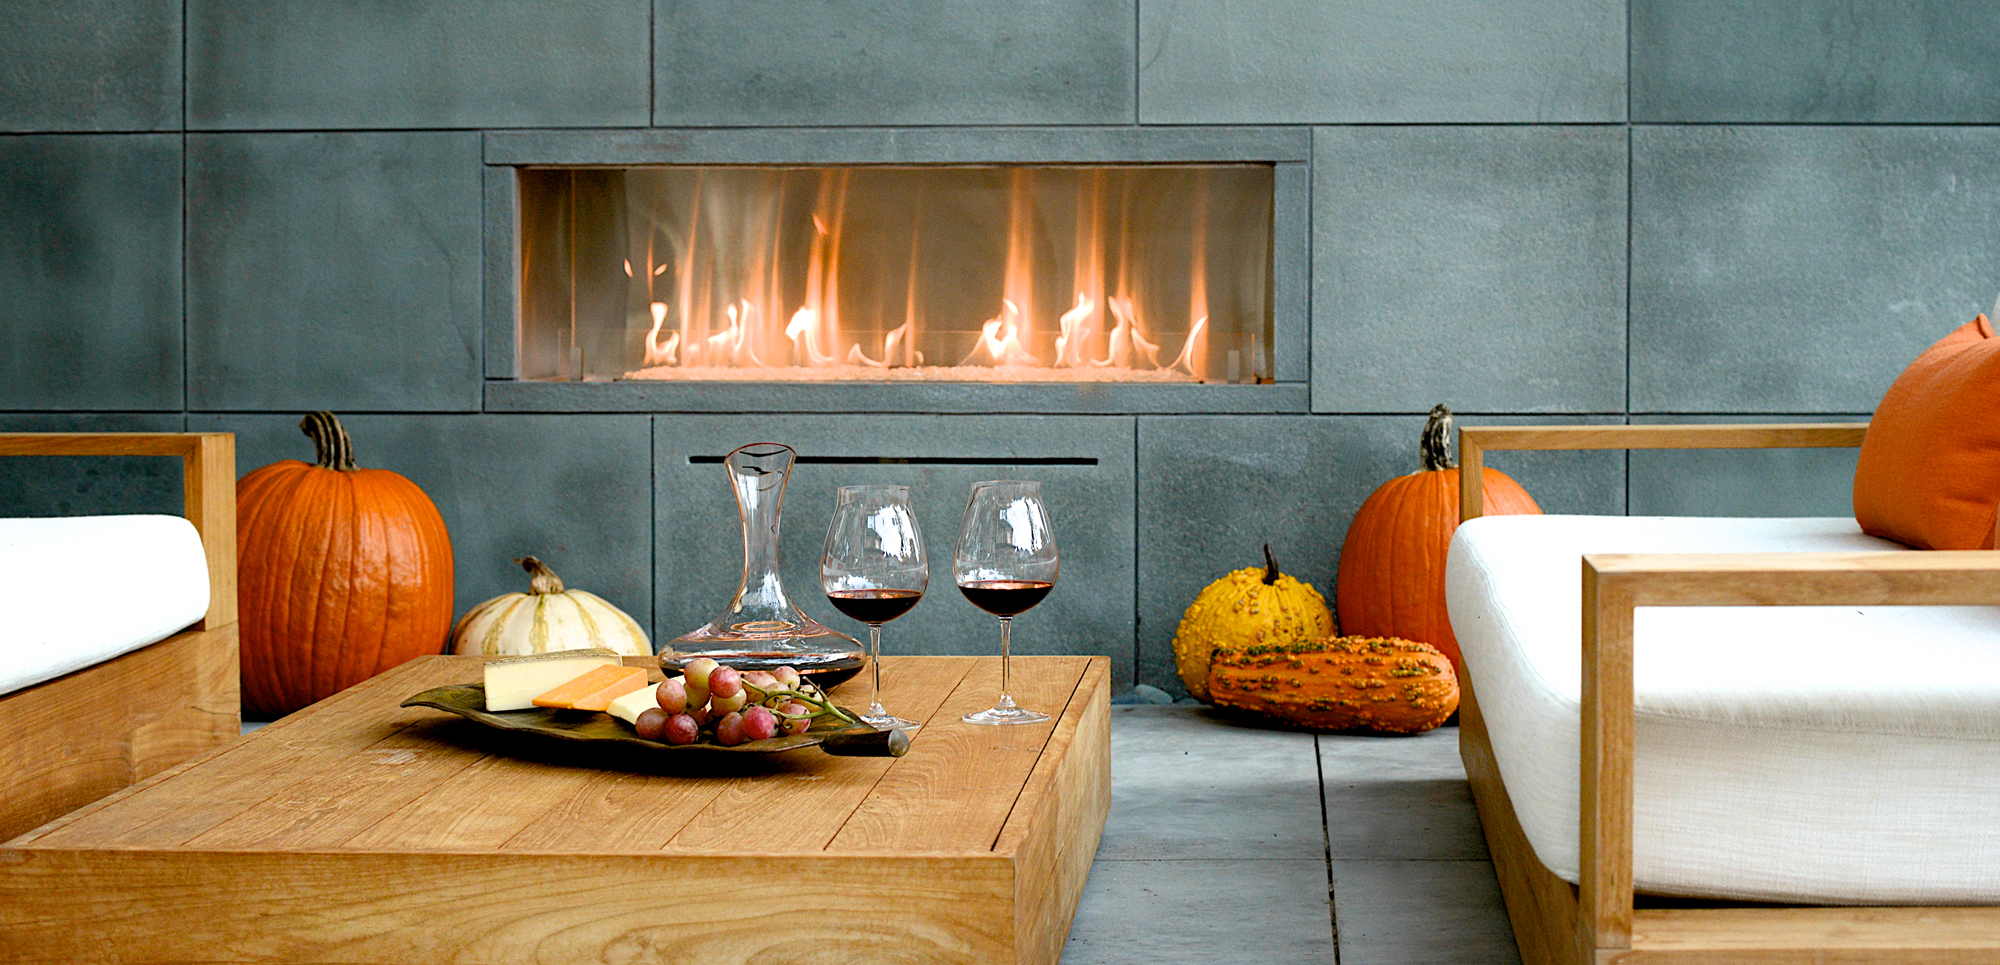 Adding A Fireplace to A Home Elegant Spark Modern Fires